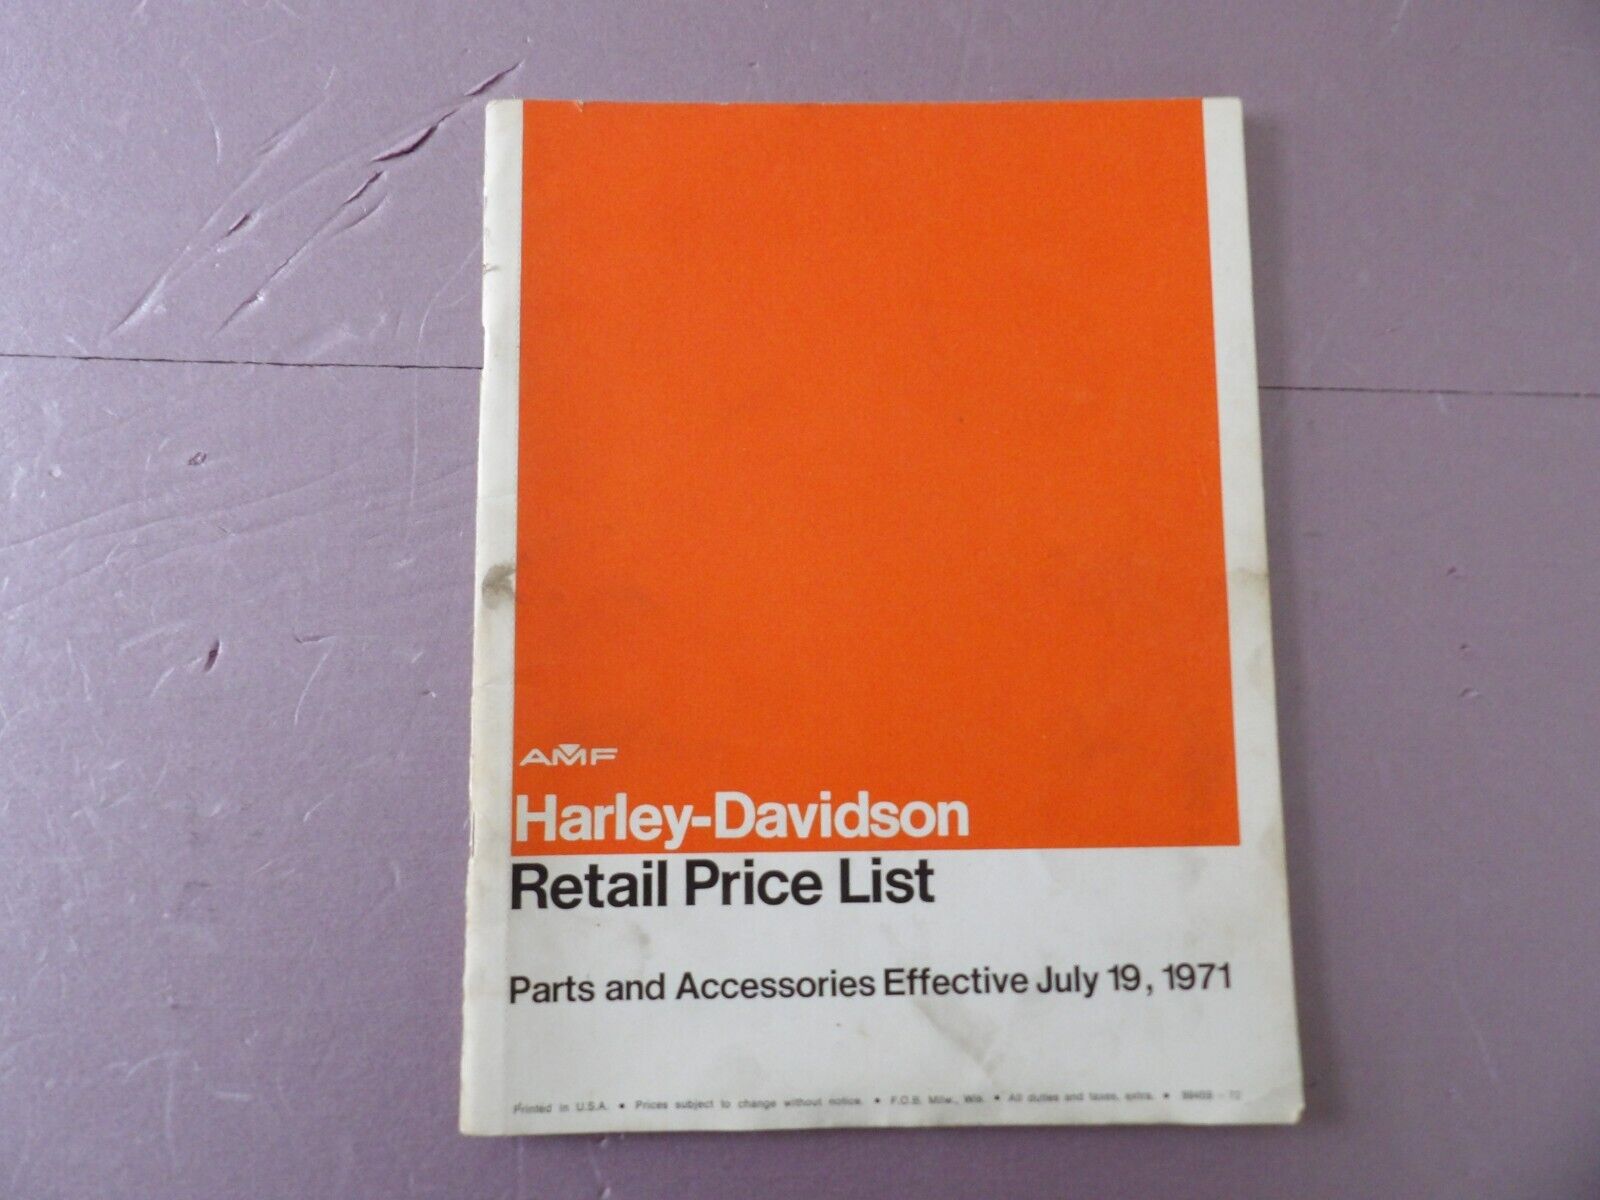 Used AMF Harley Davidson Retail Price List Motorcycle Parts July 19, 1971